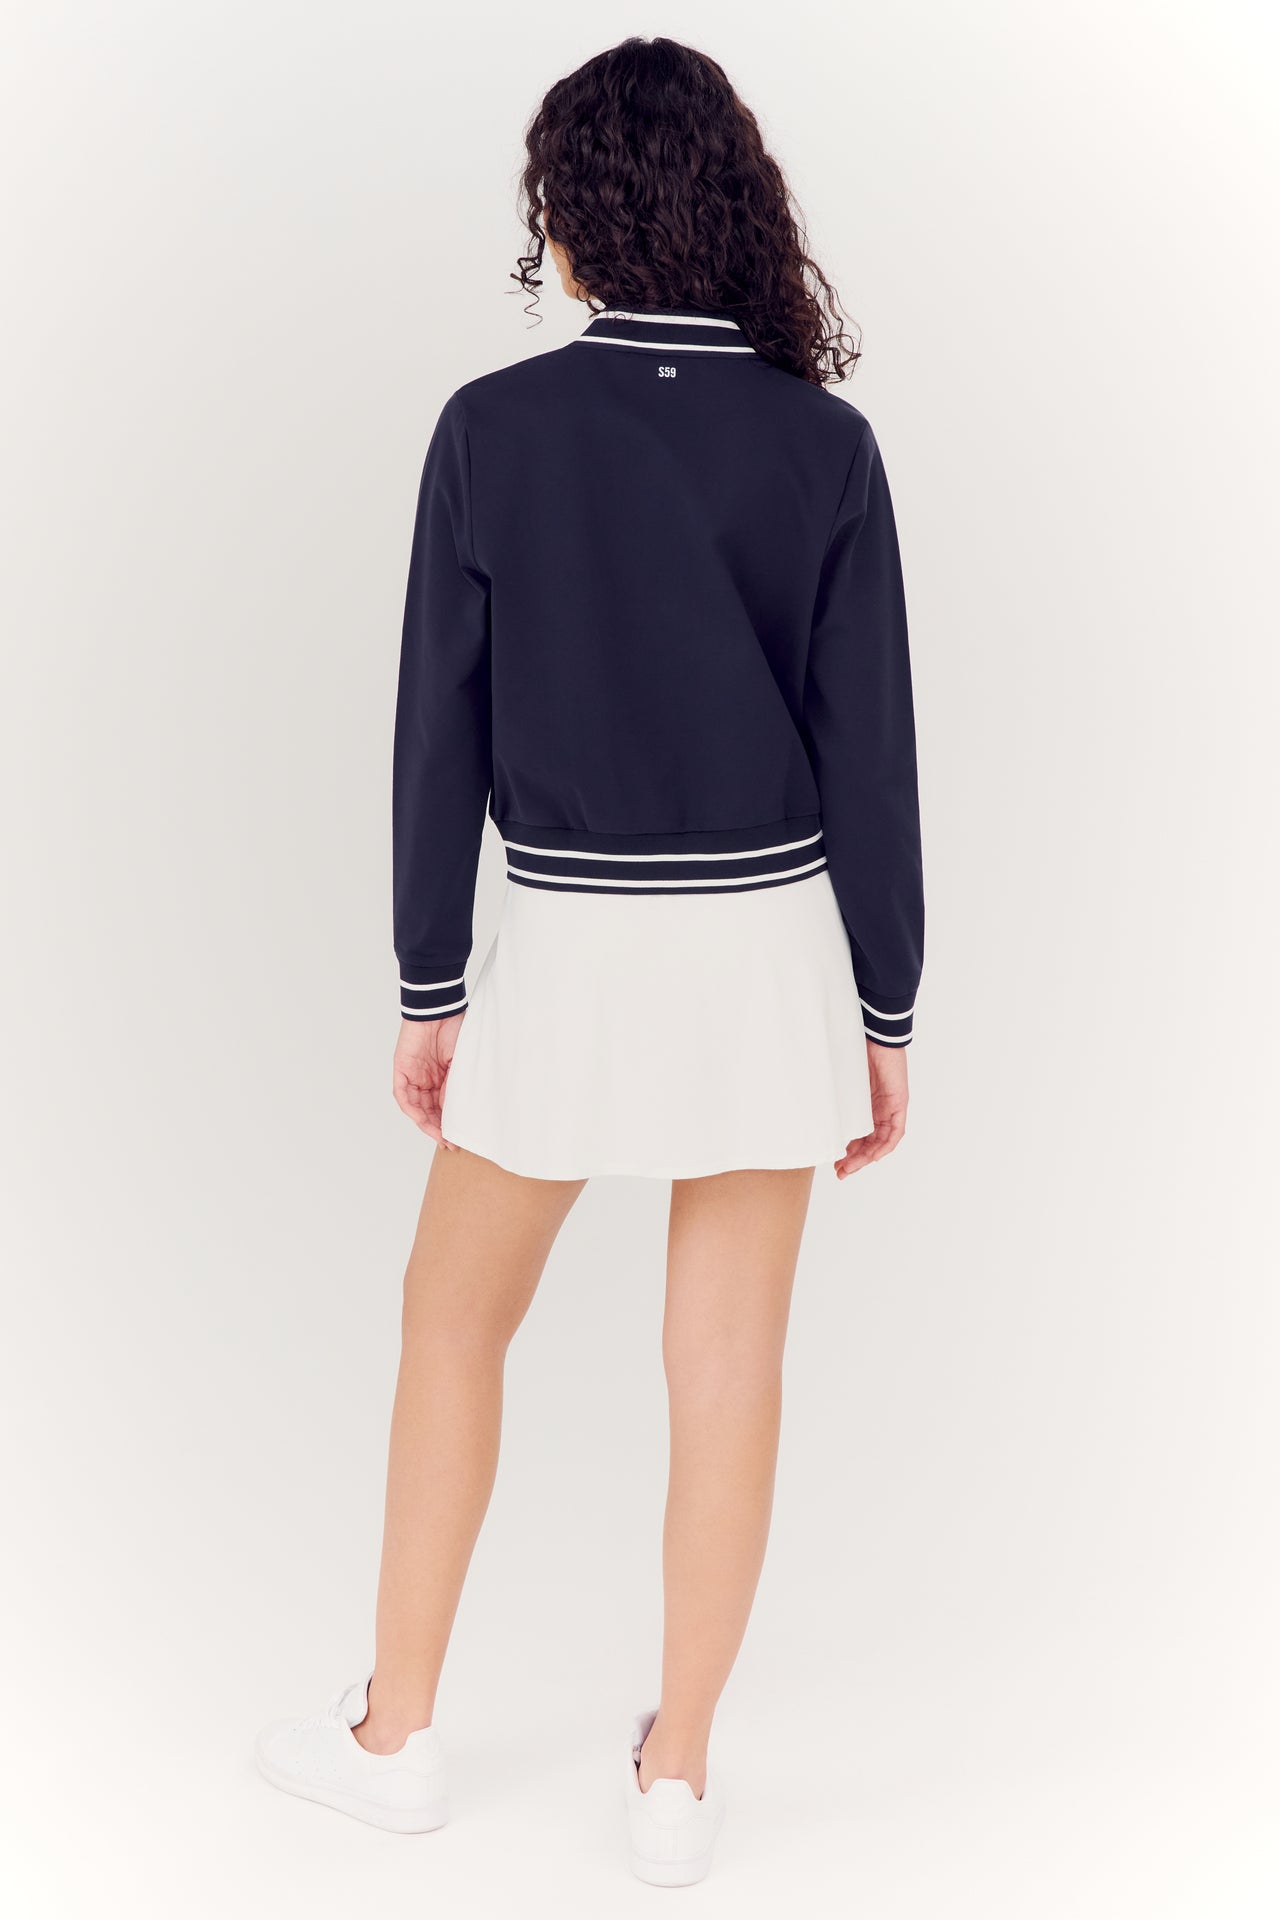 A woman seen from behind wearing a SPLITS59 Ever Supplex Jacket in Indigo and a white pleated skirt made of nylon spandex fabric with white sneakers.